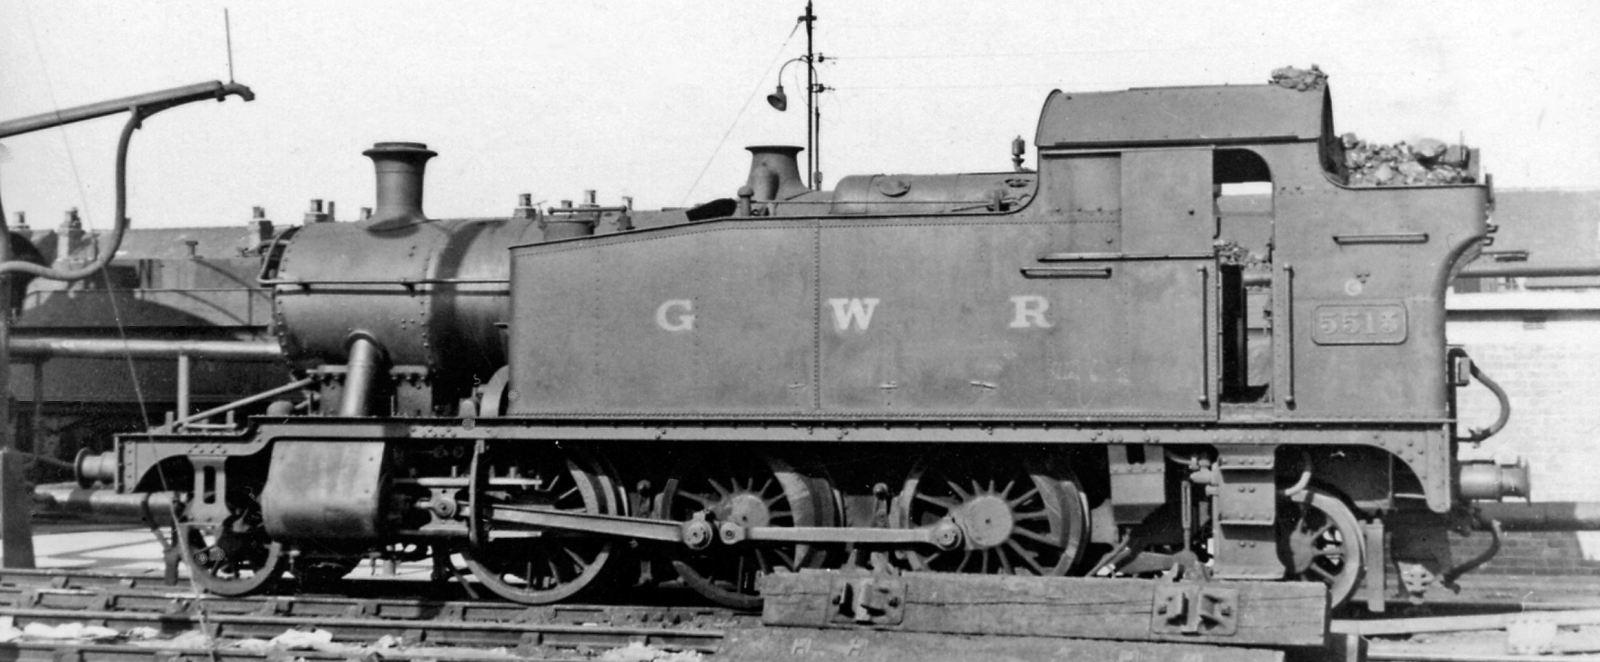 No. 5515 in March 1948 shortly after the formation of British Railways, still with GWR lettering